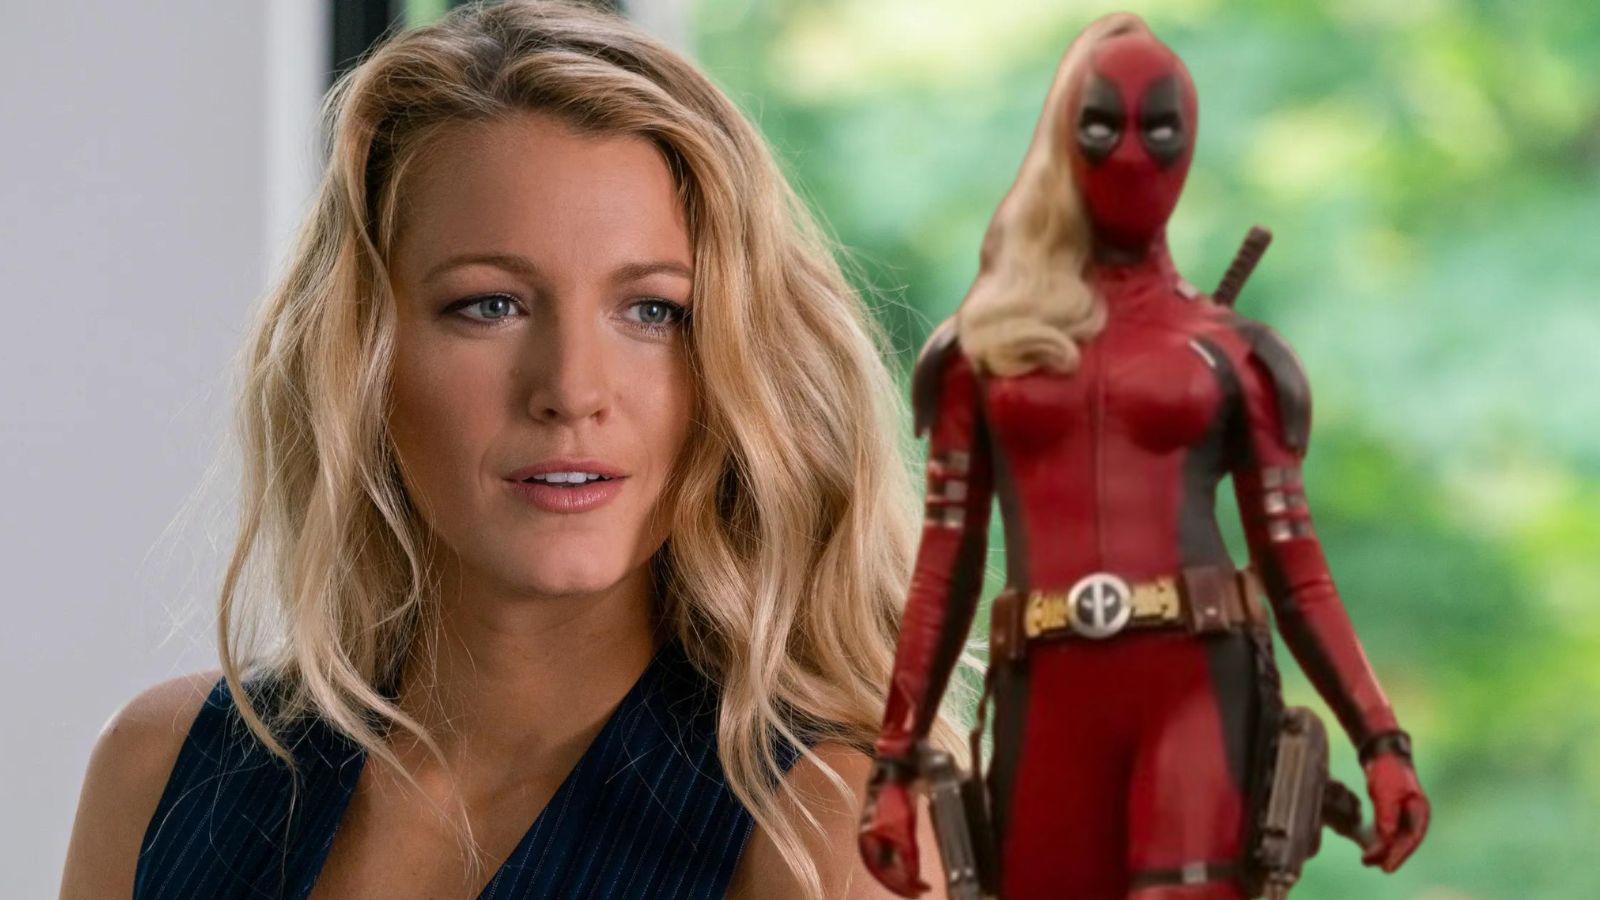 Lady Deadpool and Blake Lively in A Simple Favour